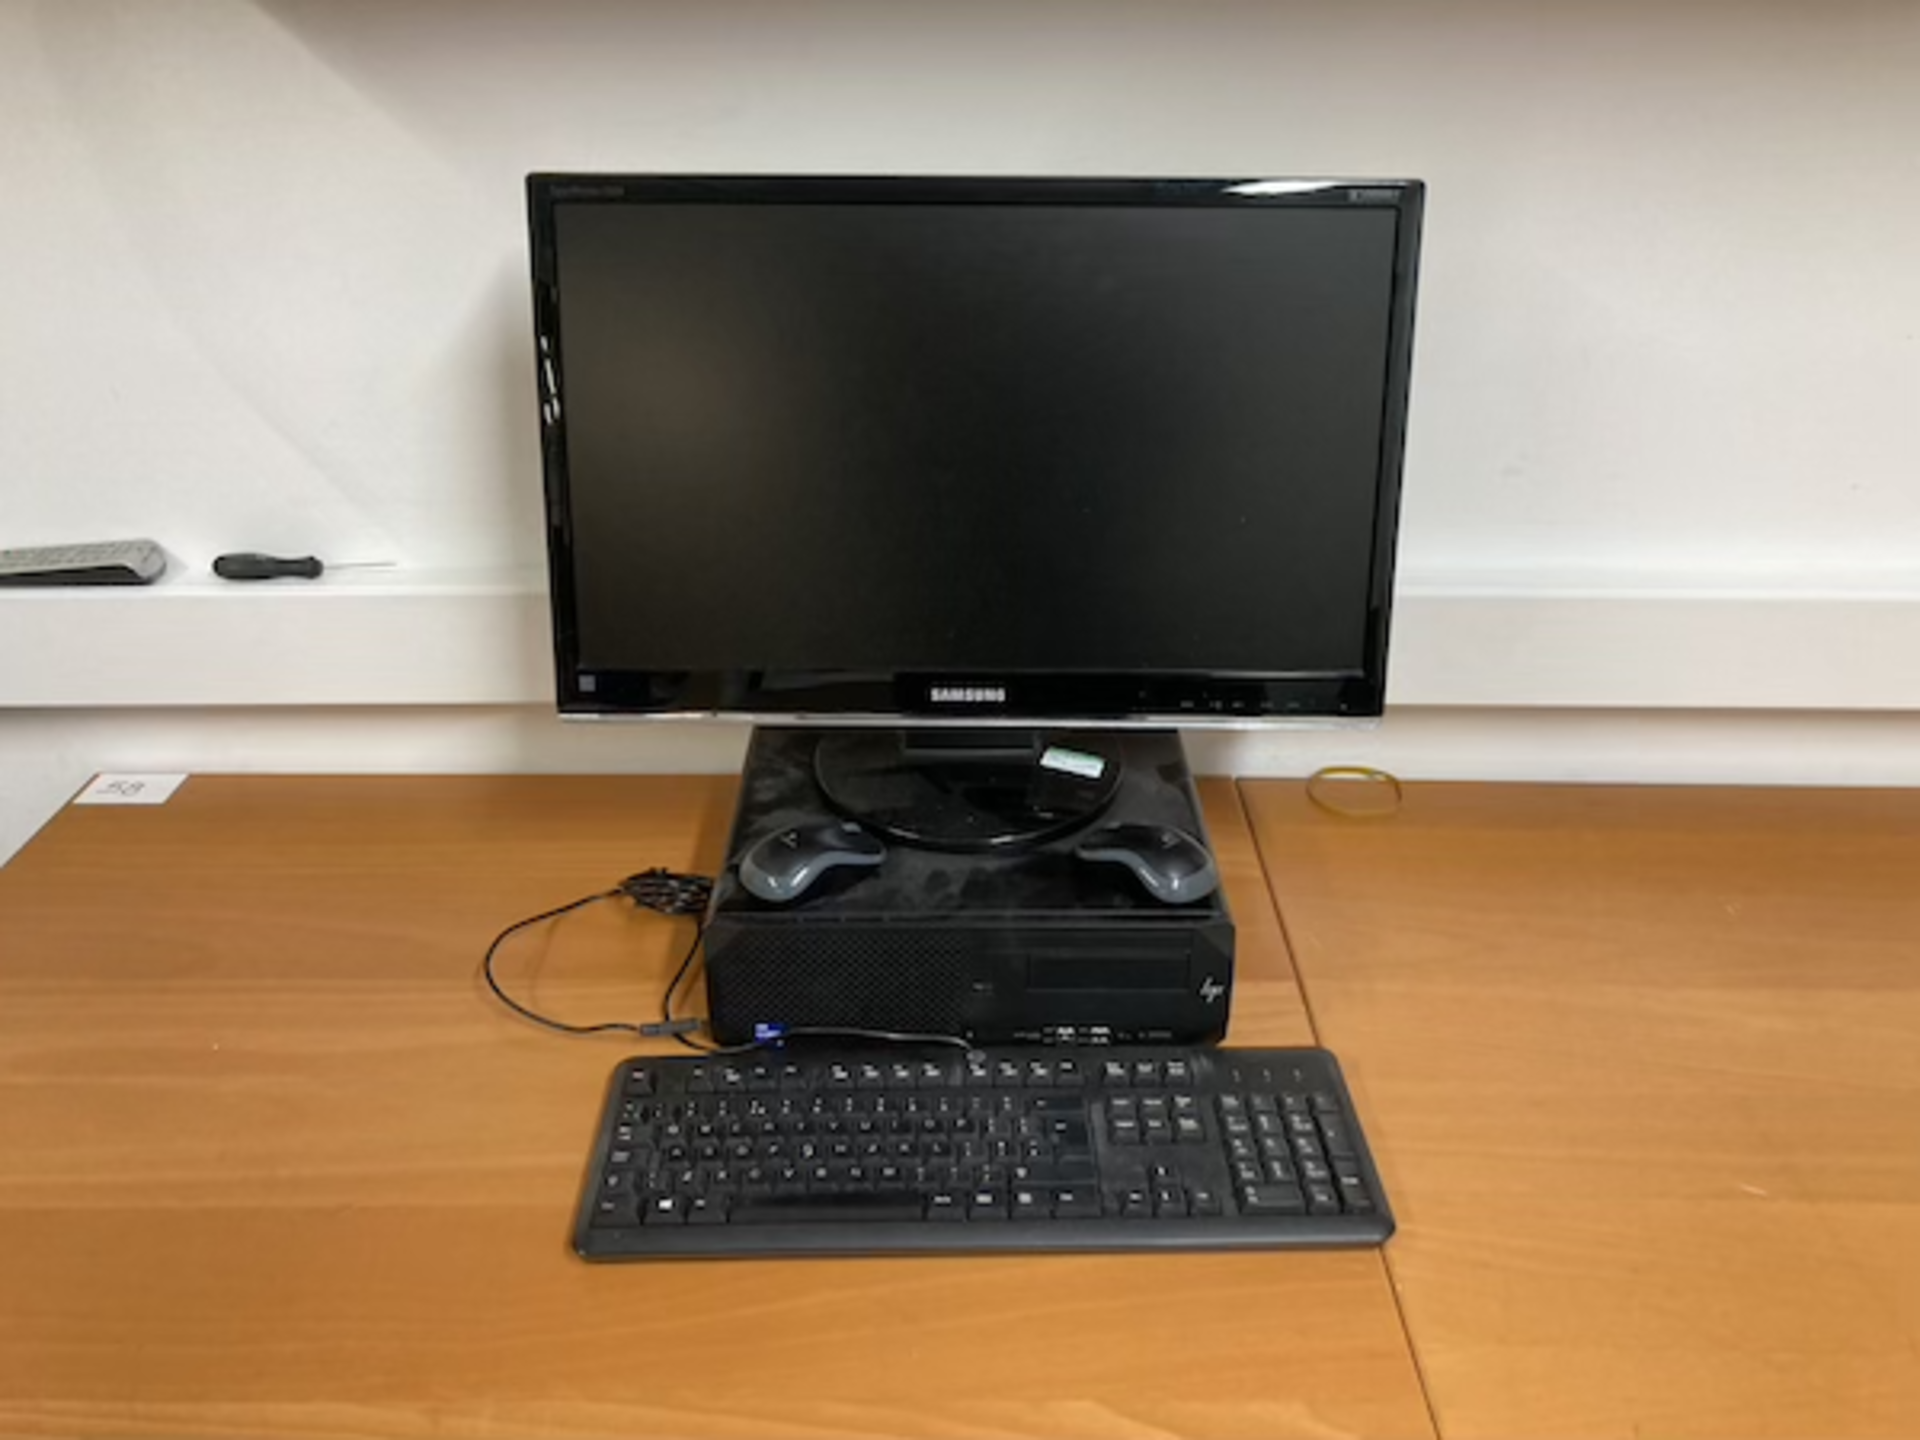 HP Z2 core i7 mini workstation with Samsung SyncMaster 2494 monitor